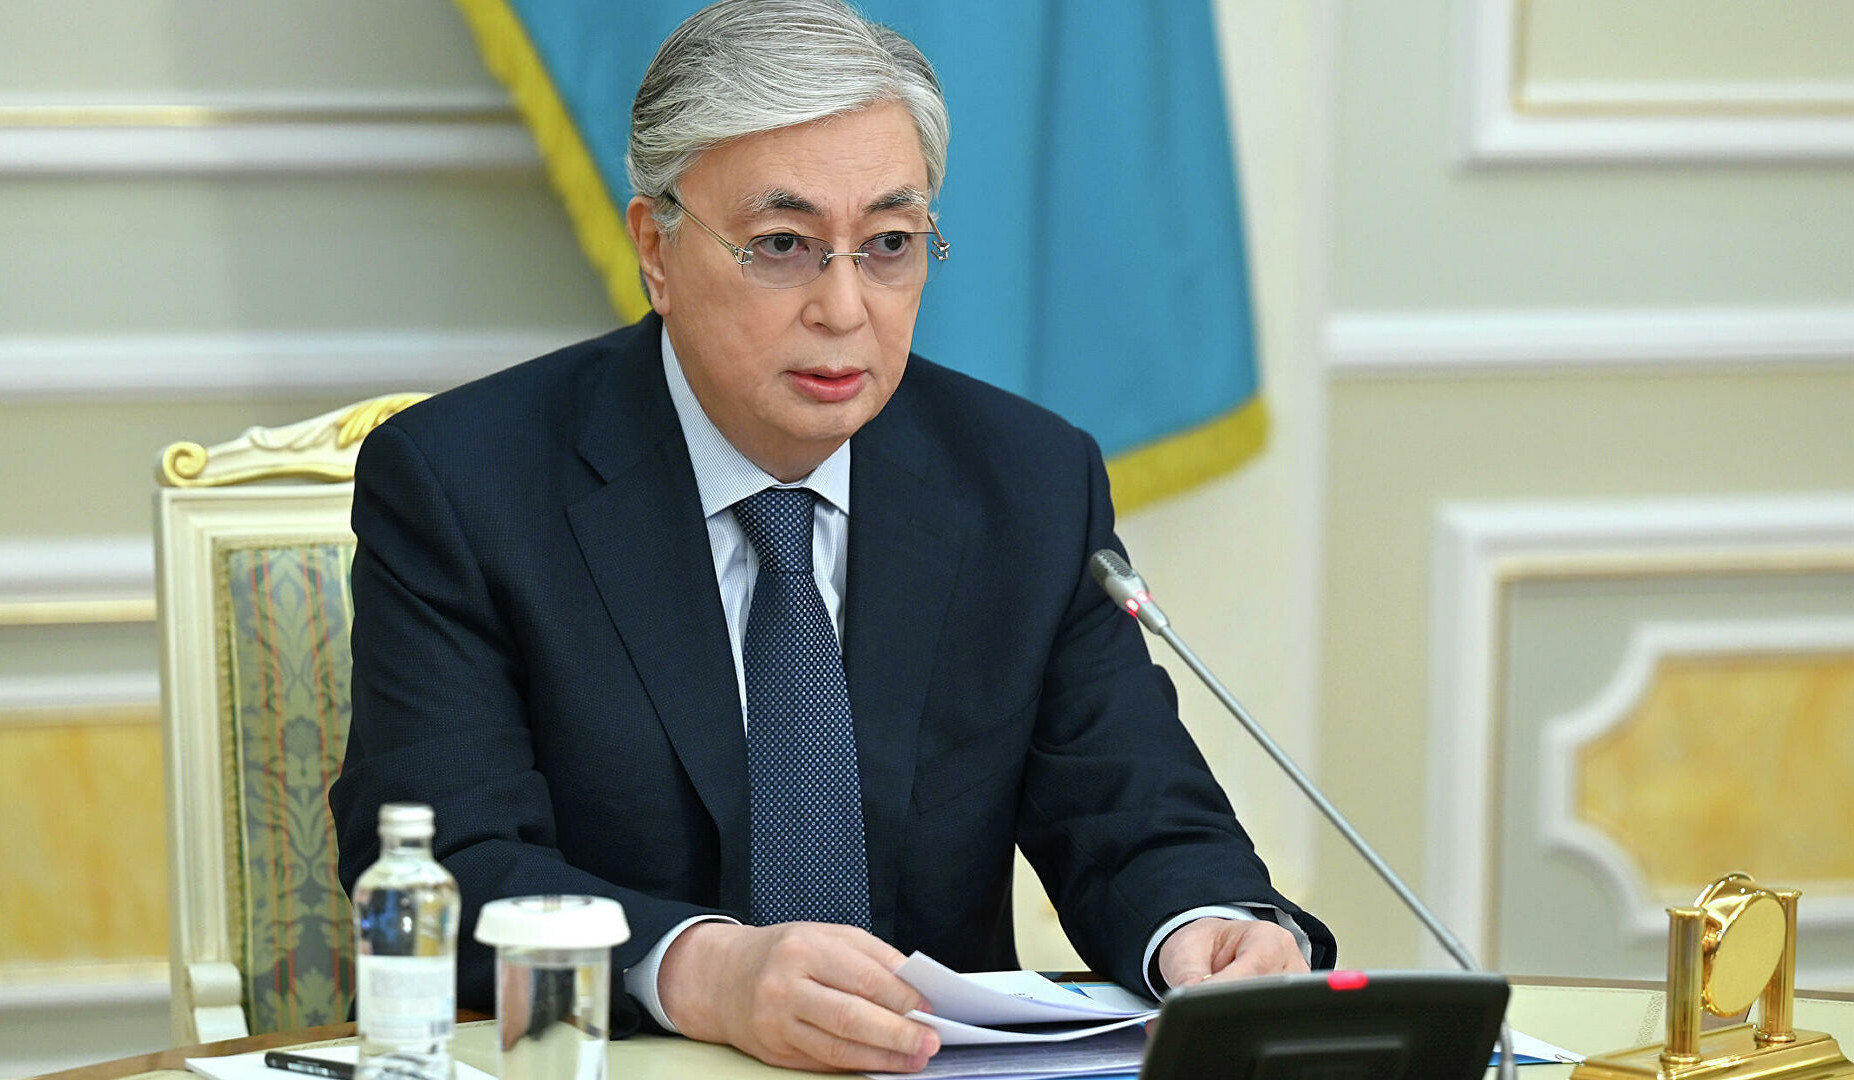 CSTO peacekeeping contingent in Kazakhstan did not fire at protesters: Tokayev